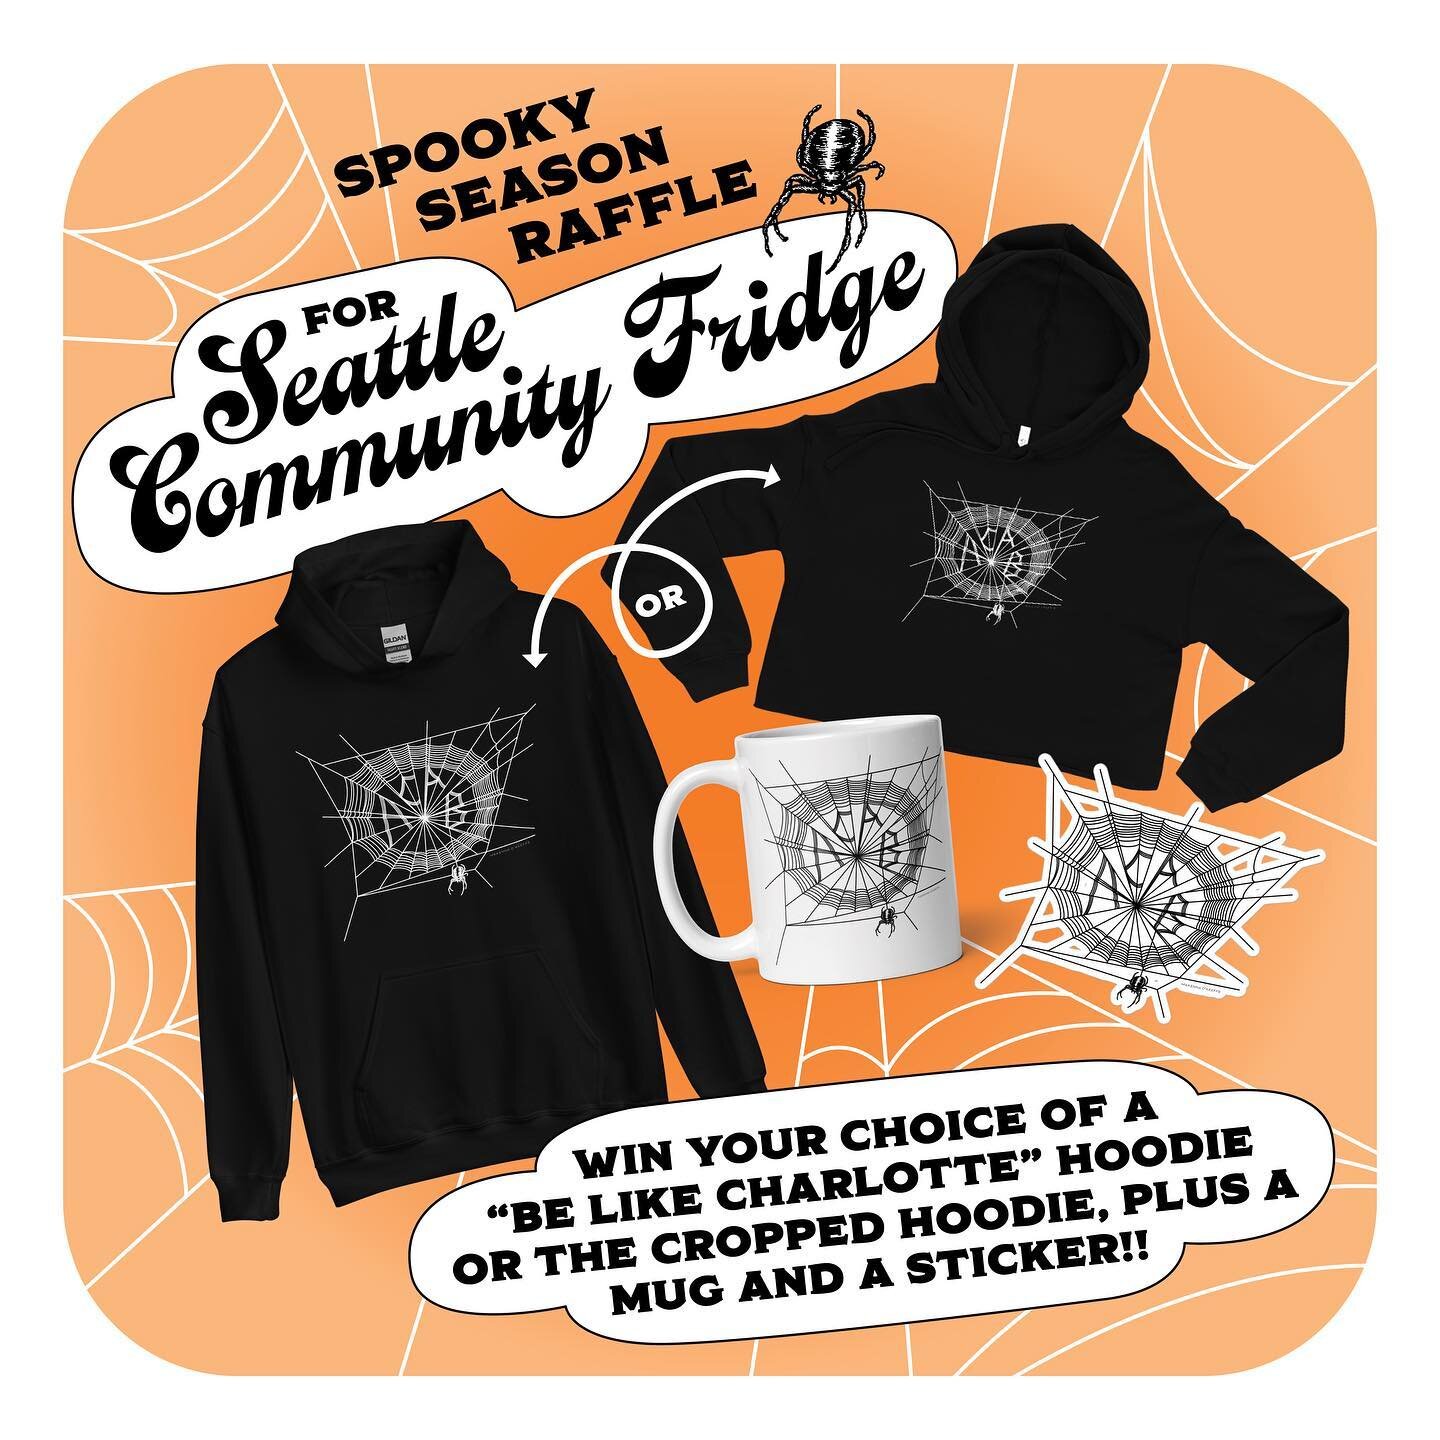 👻🎃👻 SPOOKY SEASON RAFFLE FOR MUTUAL AID!!! 👻🎃👻  I&rsquo;m raffling off some &ldquo;Be Like Charlotte&rdquo; goodies for Seattle Community Fridge!!! 💫 You could win this cozy time, spooky season ACAB bundle including a hoodie of your choice (ei